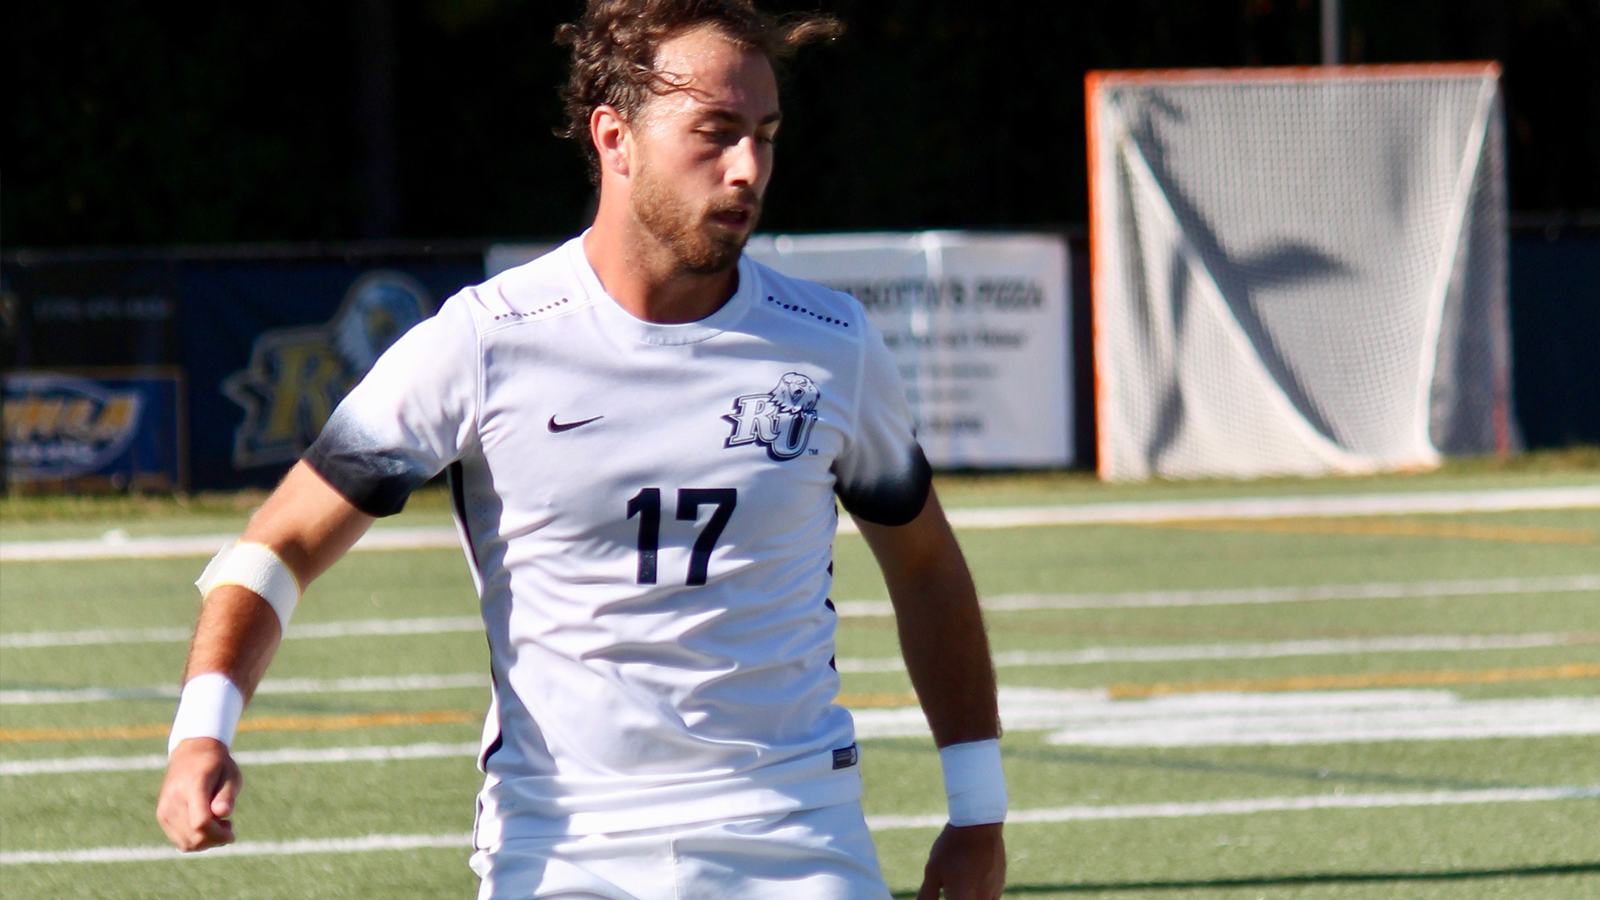 2019 NAIA Men's Soccer Players of the Week - Week Seven